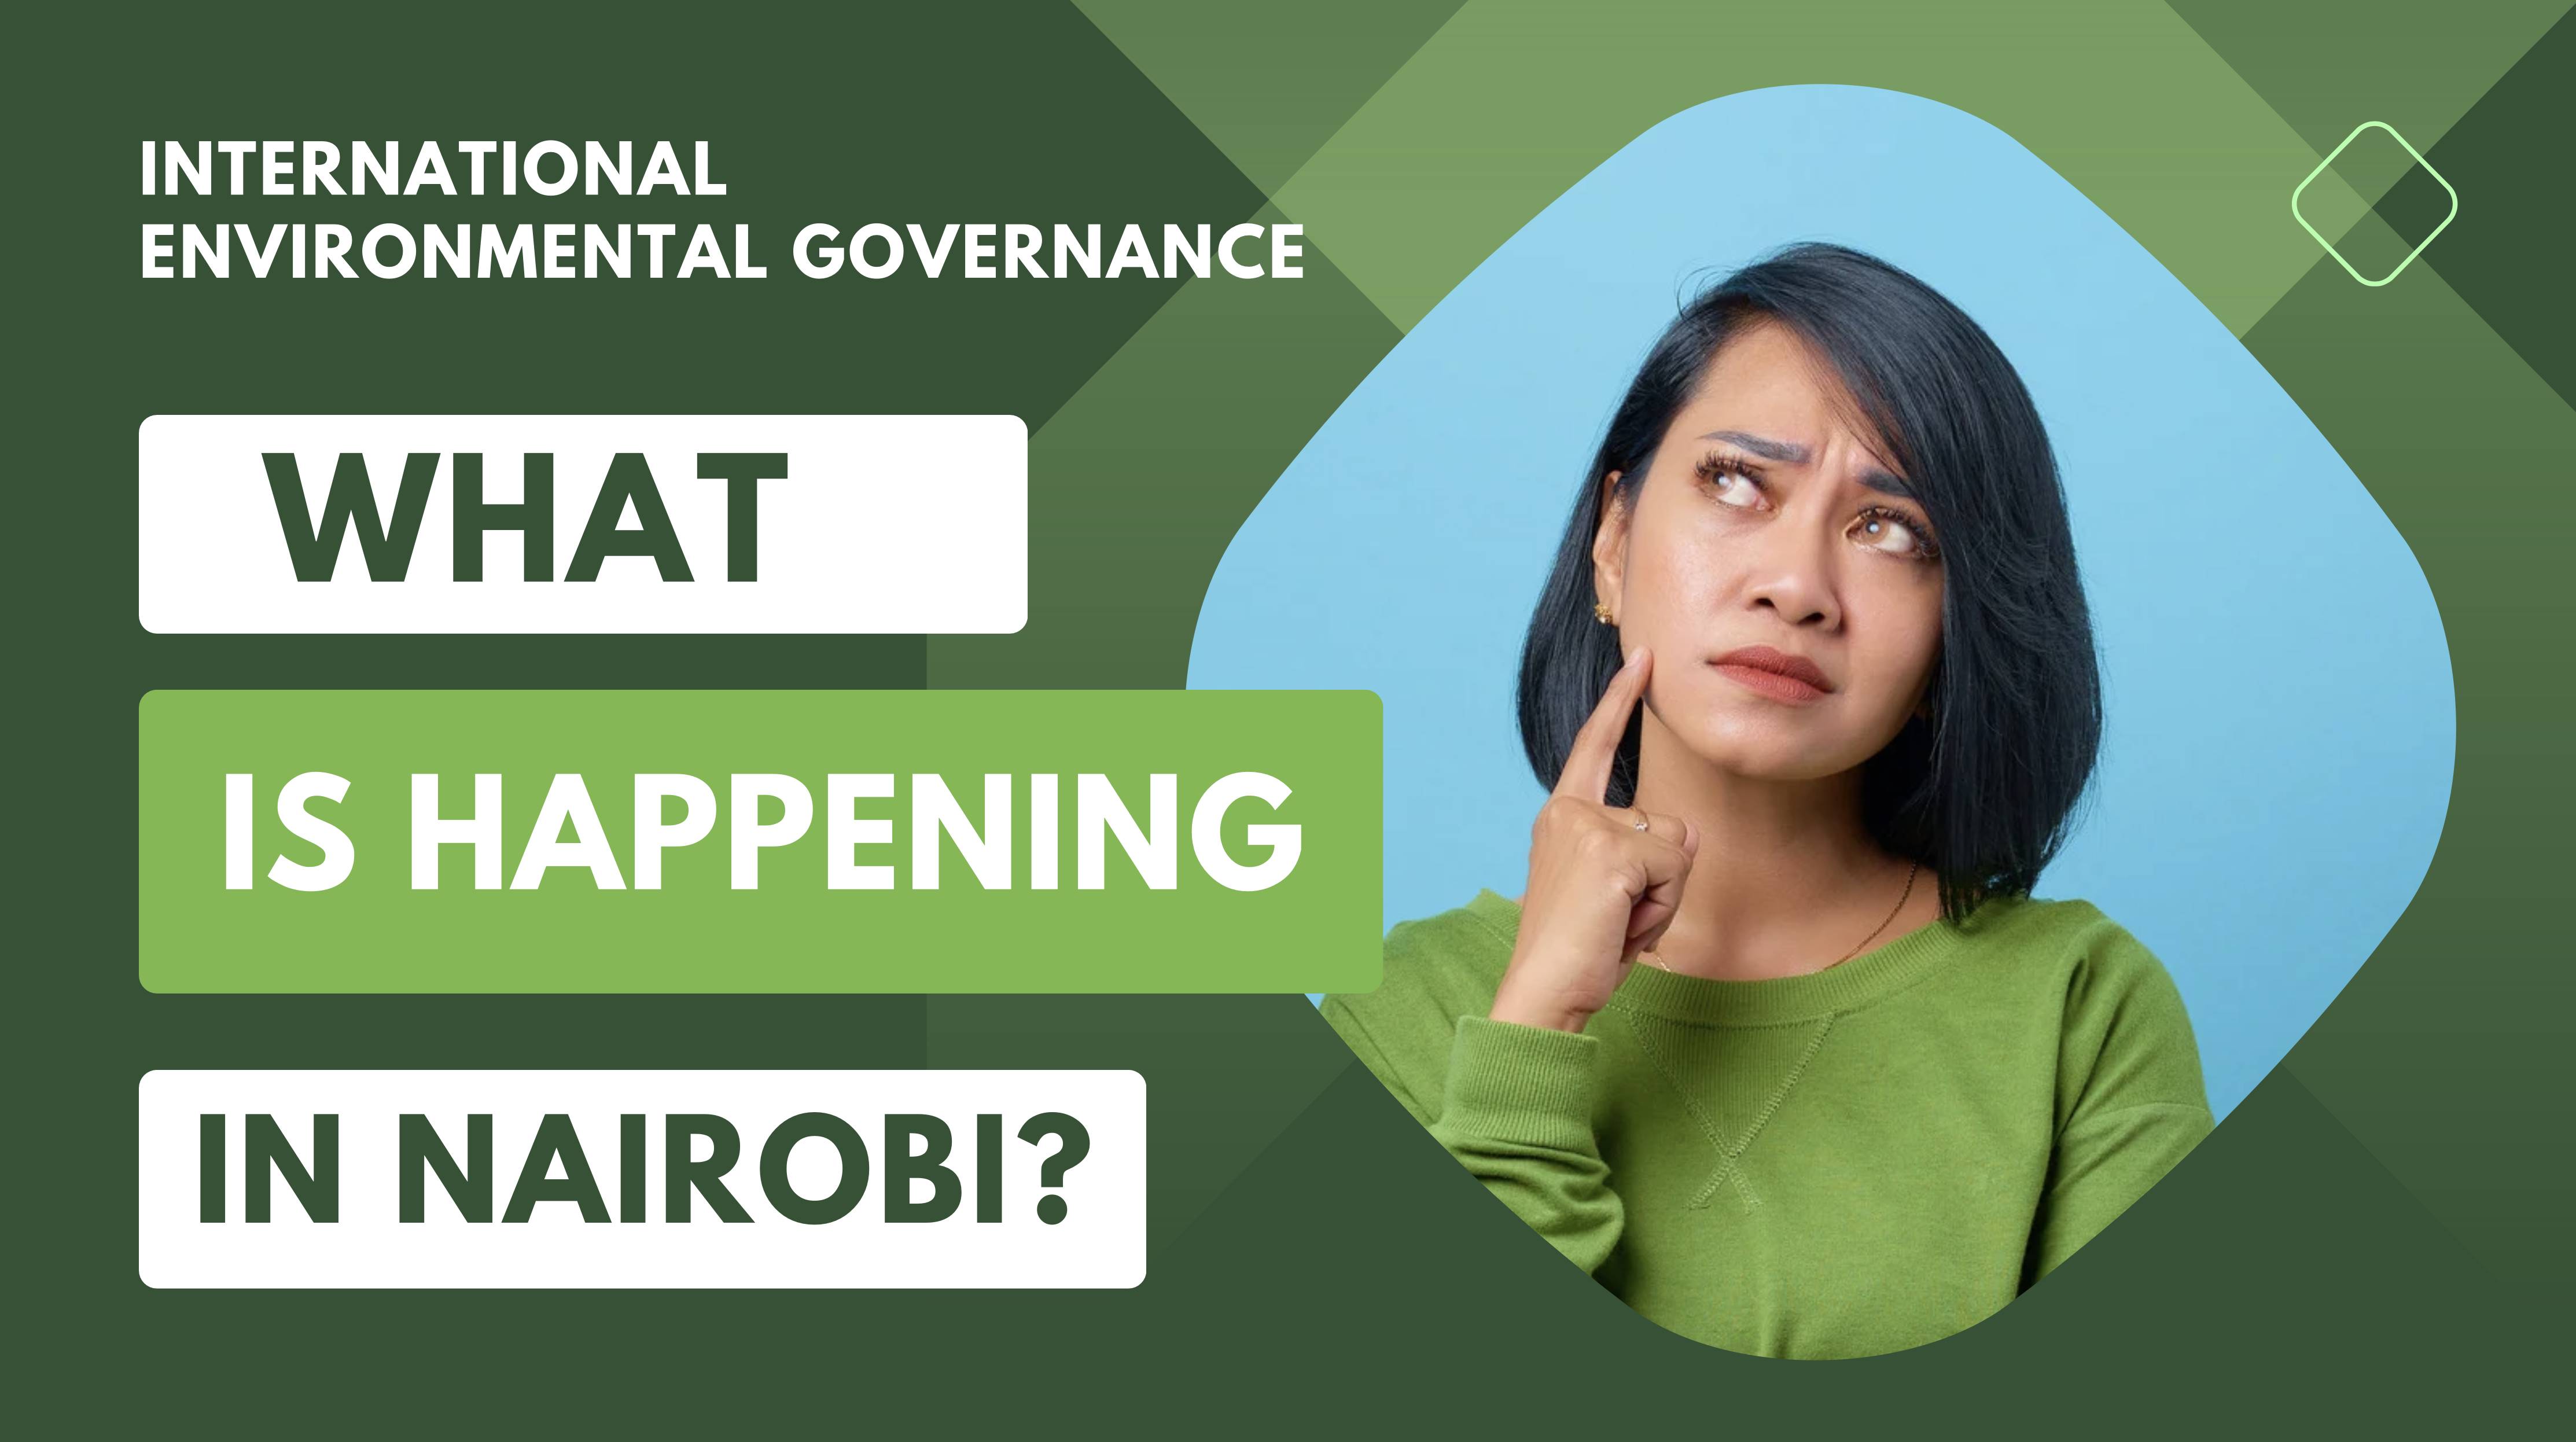 International Environmental Governance in Action: What is happening in Nairobi?